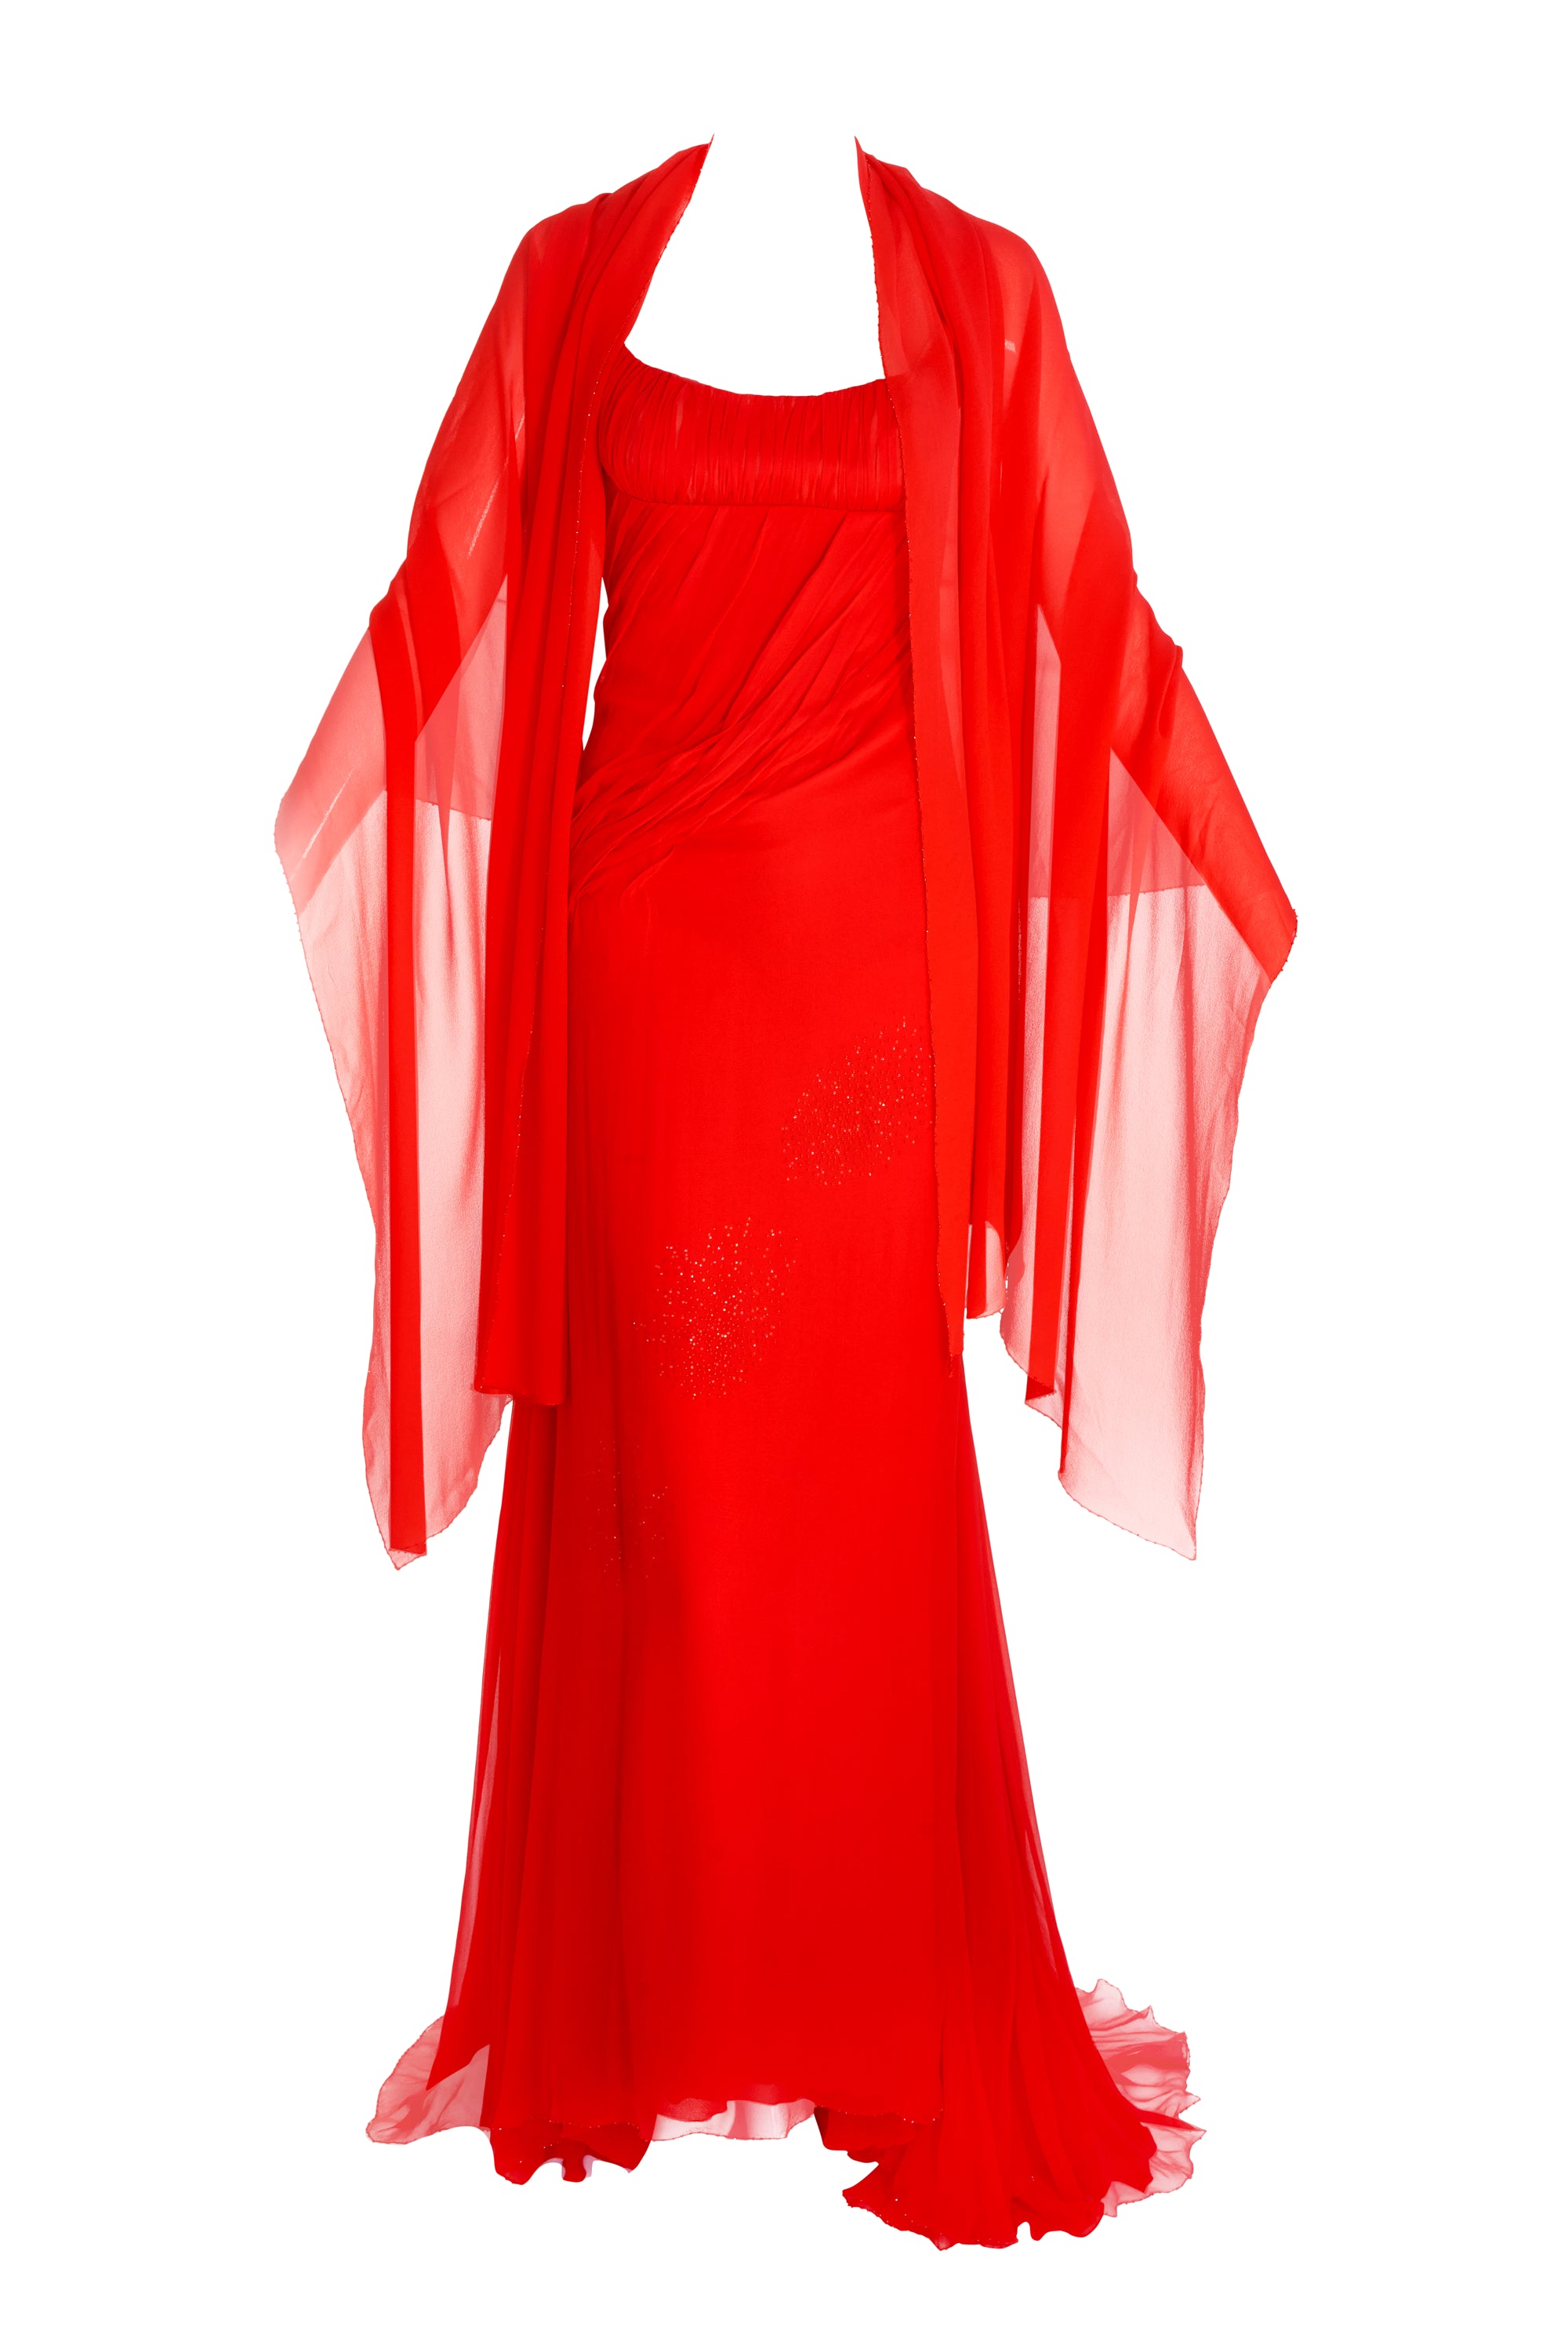 Versace Atelier Red Chiffon Gown